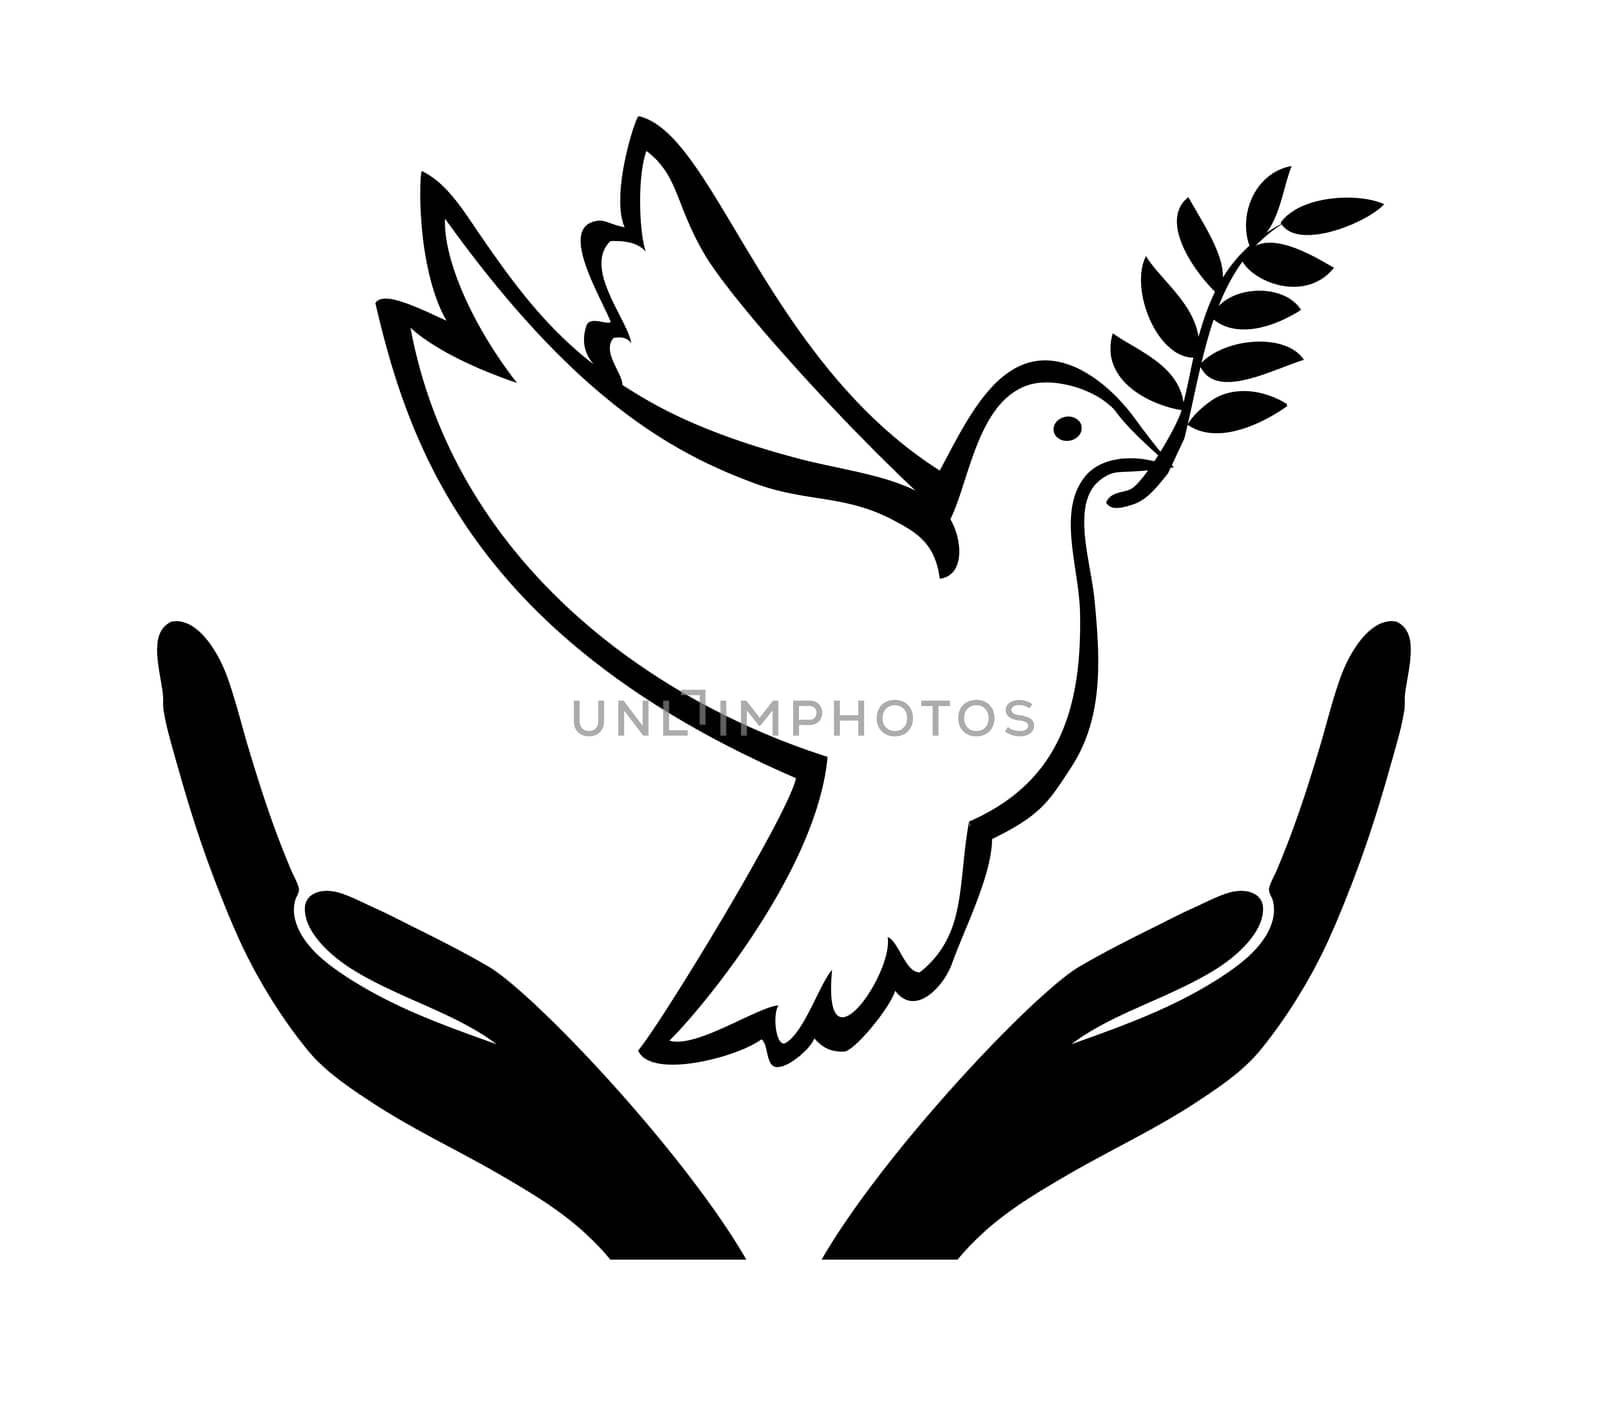 Symbol and appeal to achieve a peaceful solution